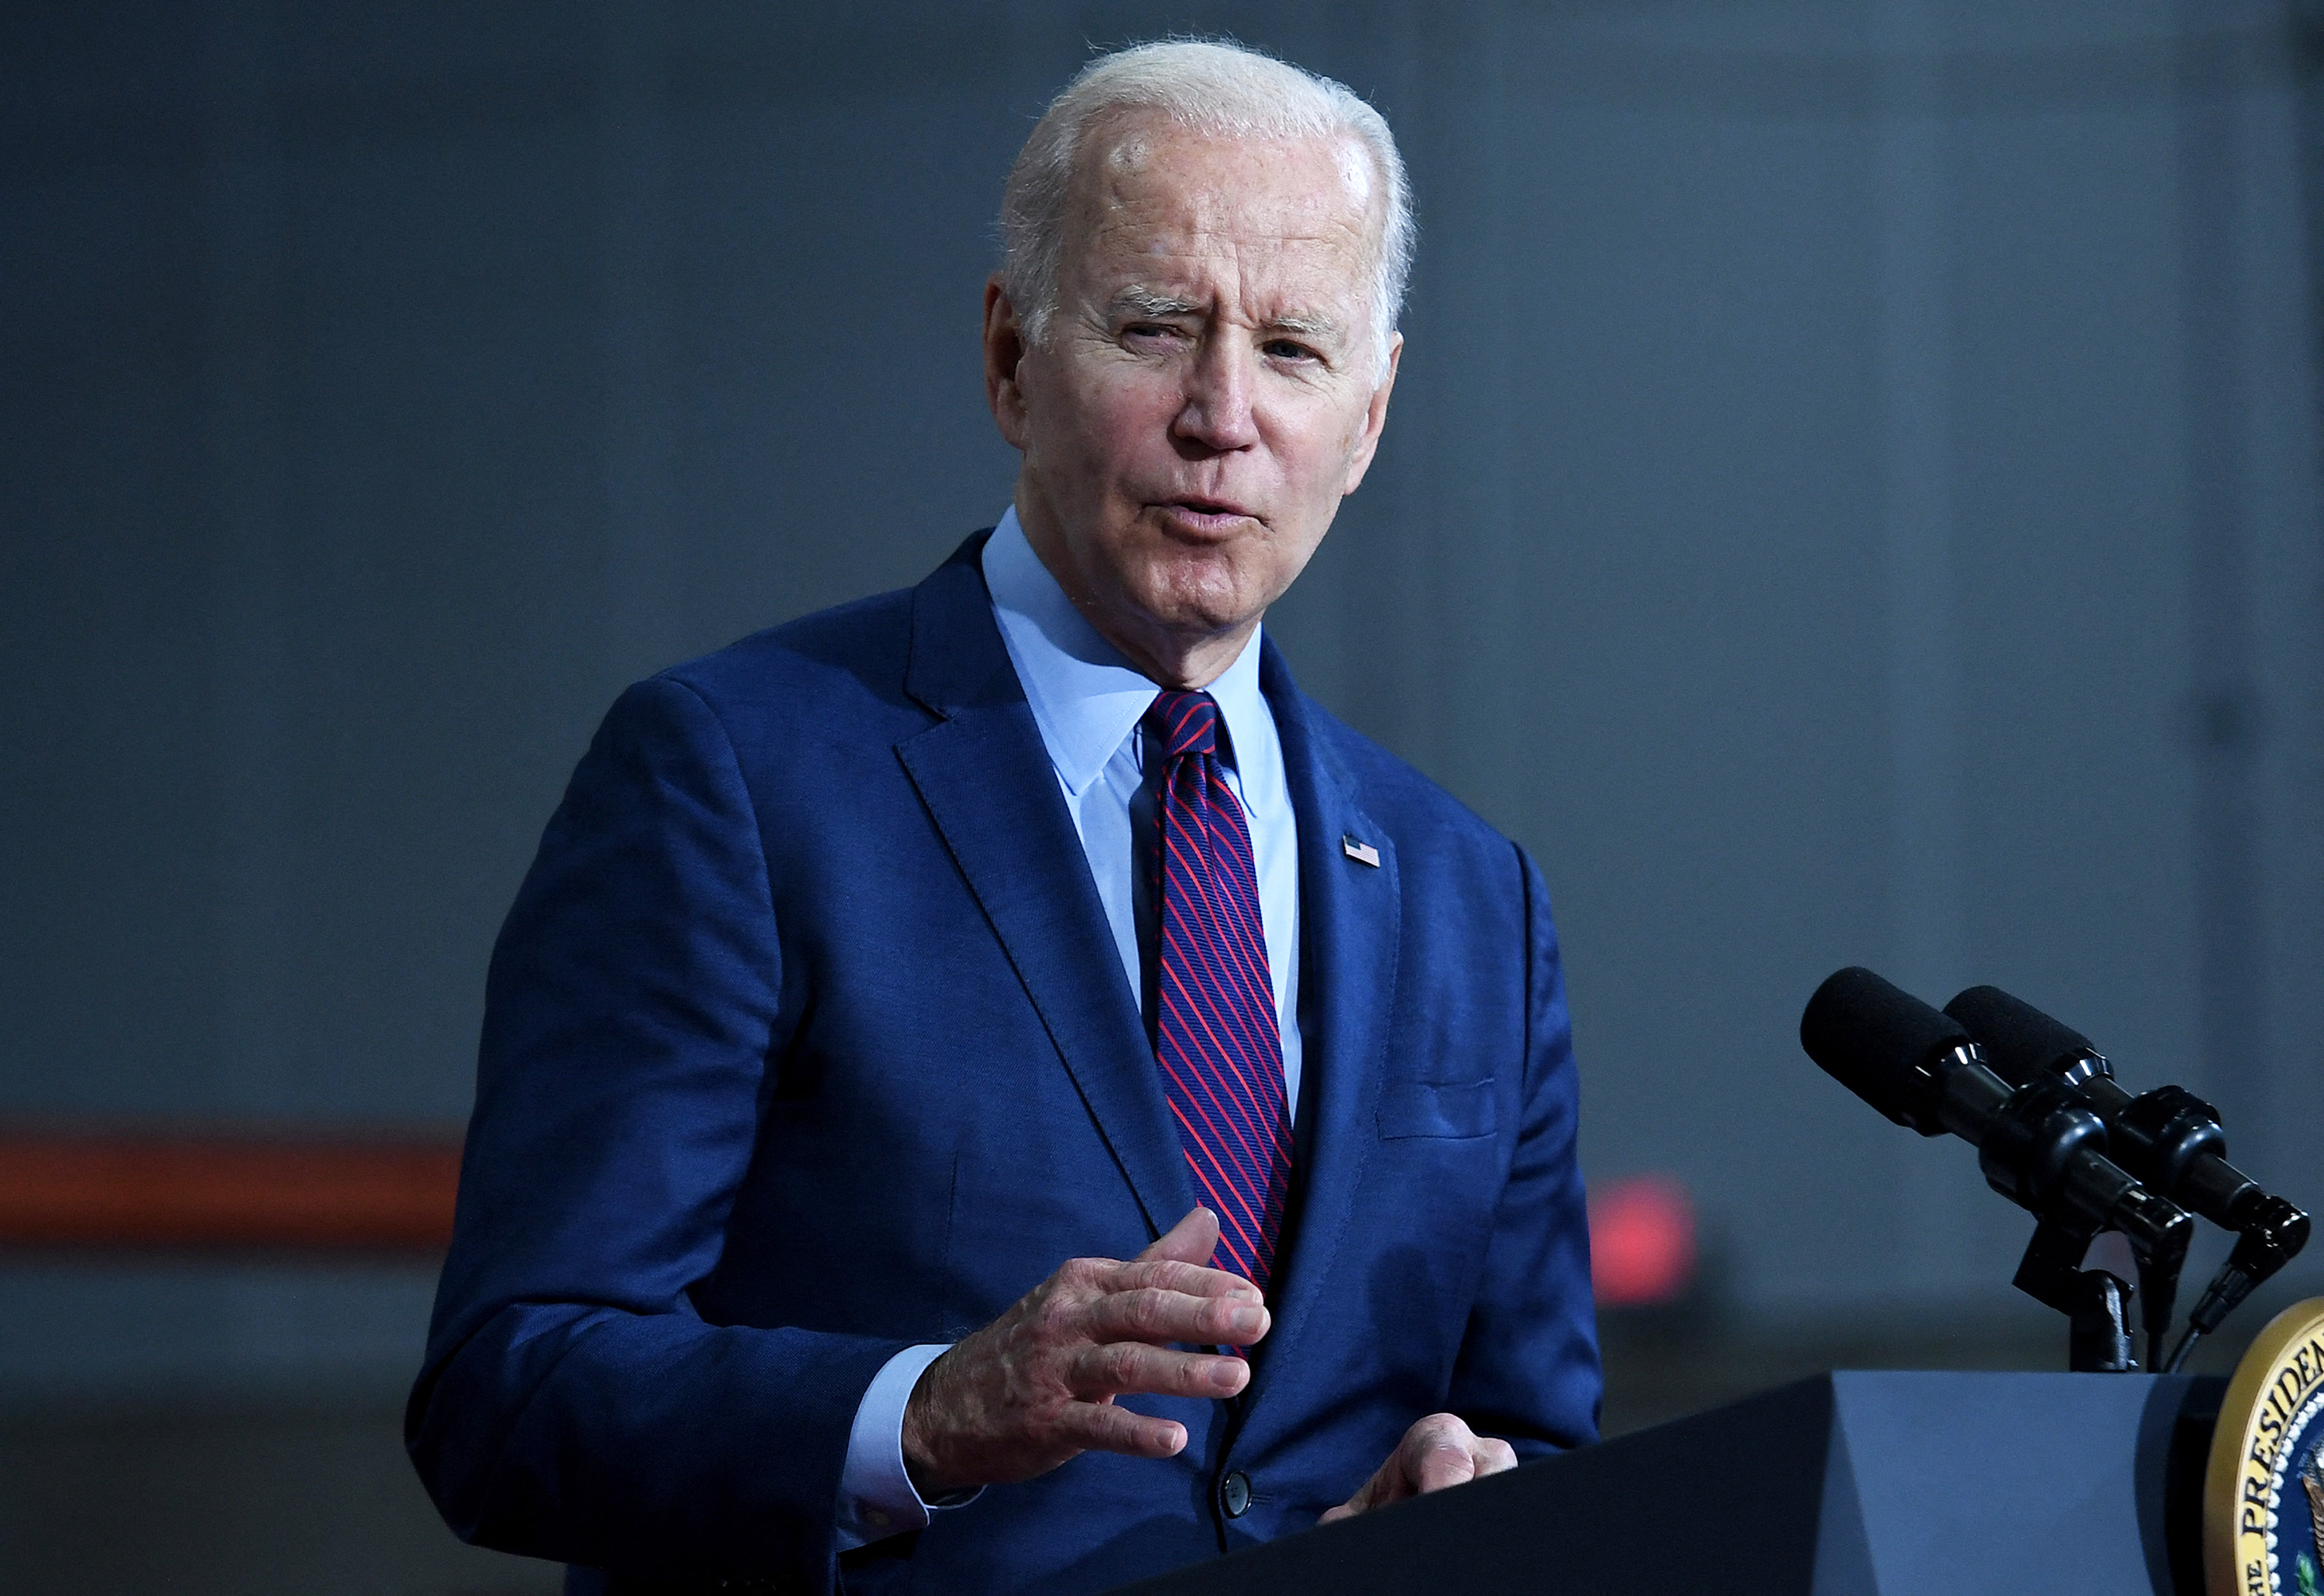 Biden announced additional US security assistance for Ukraine.